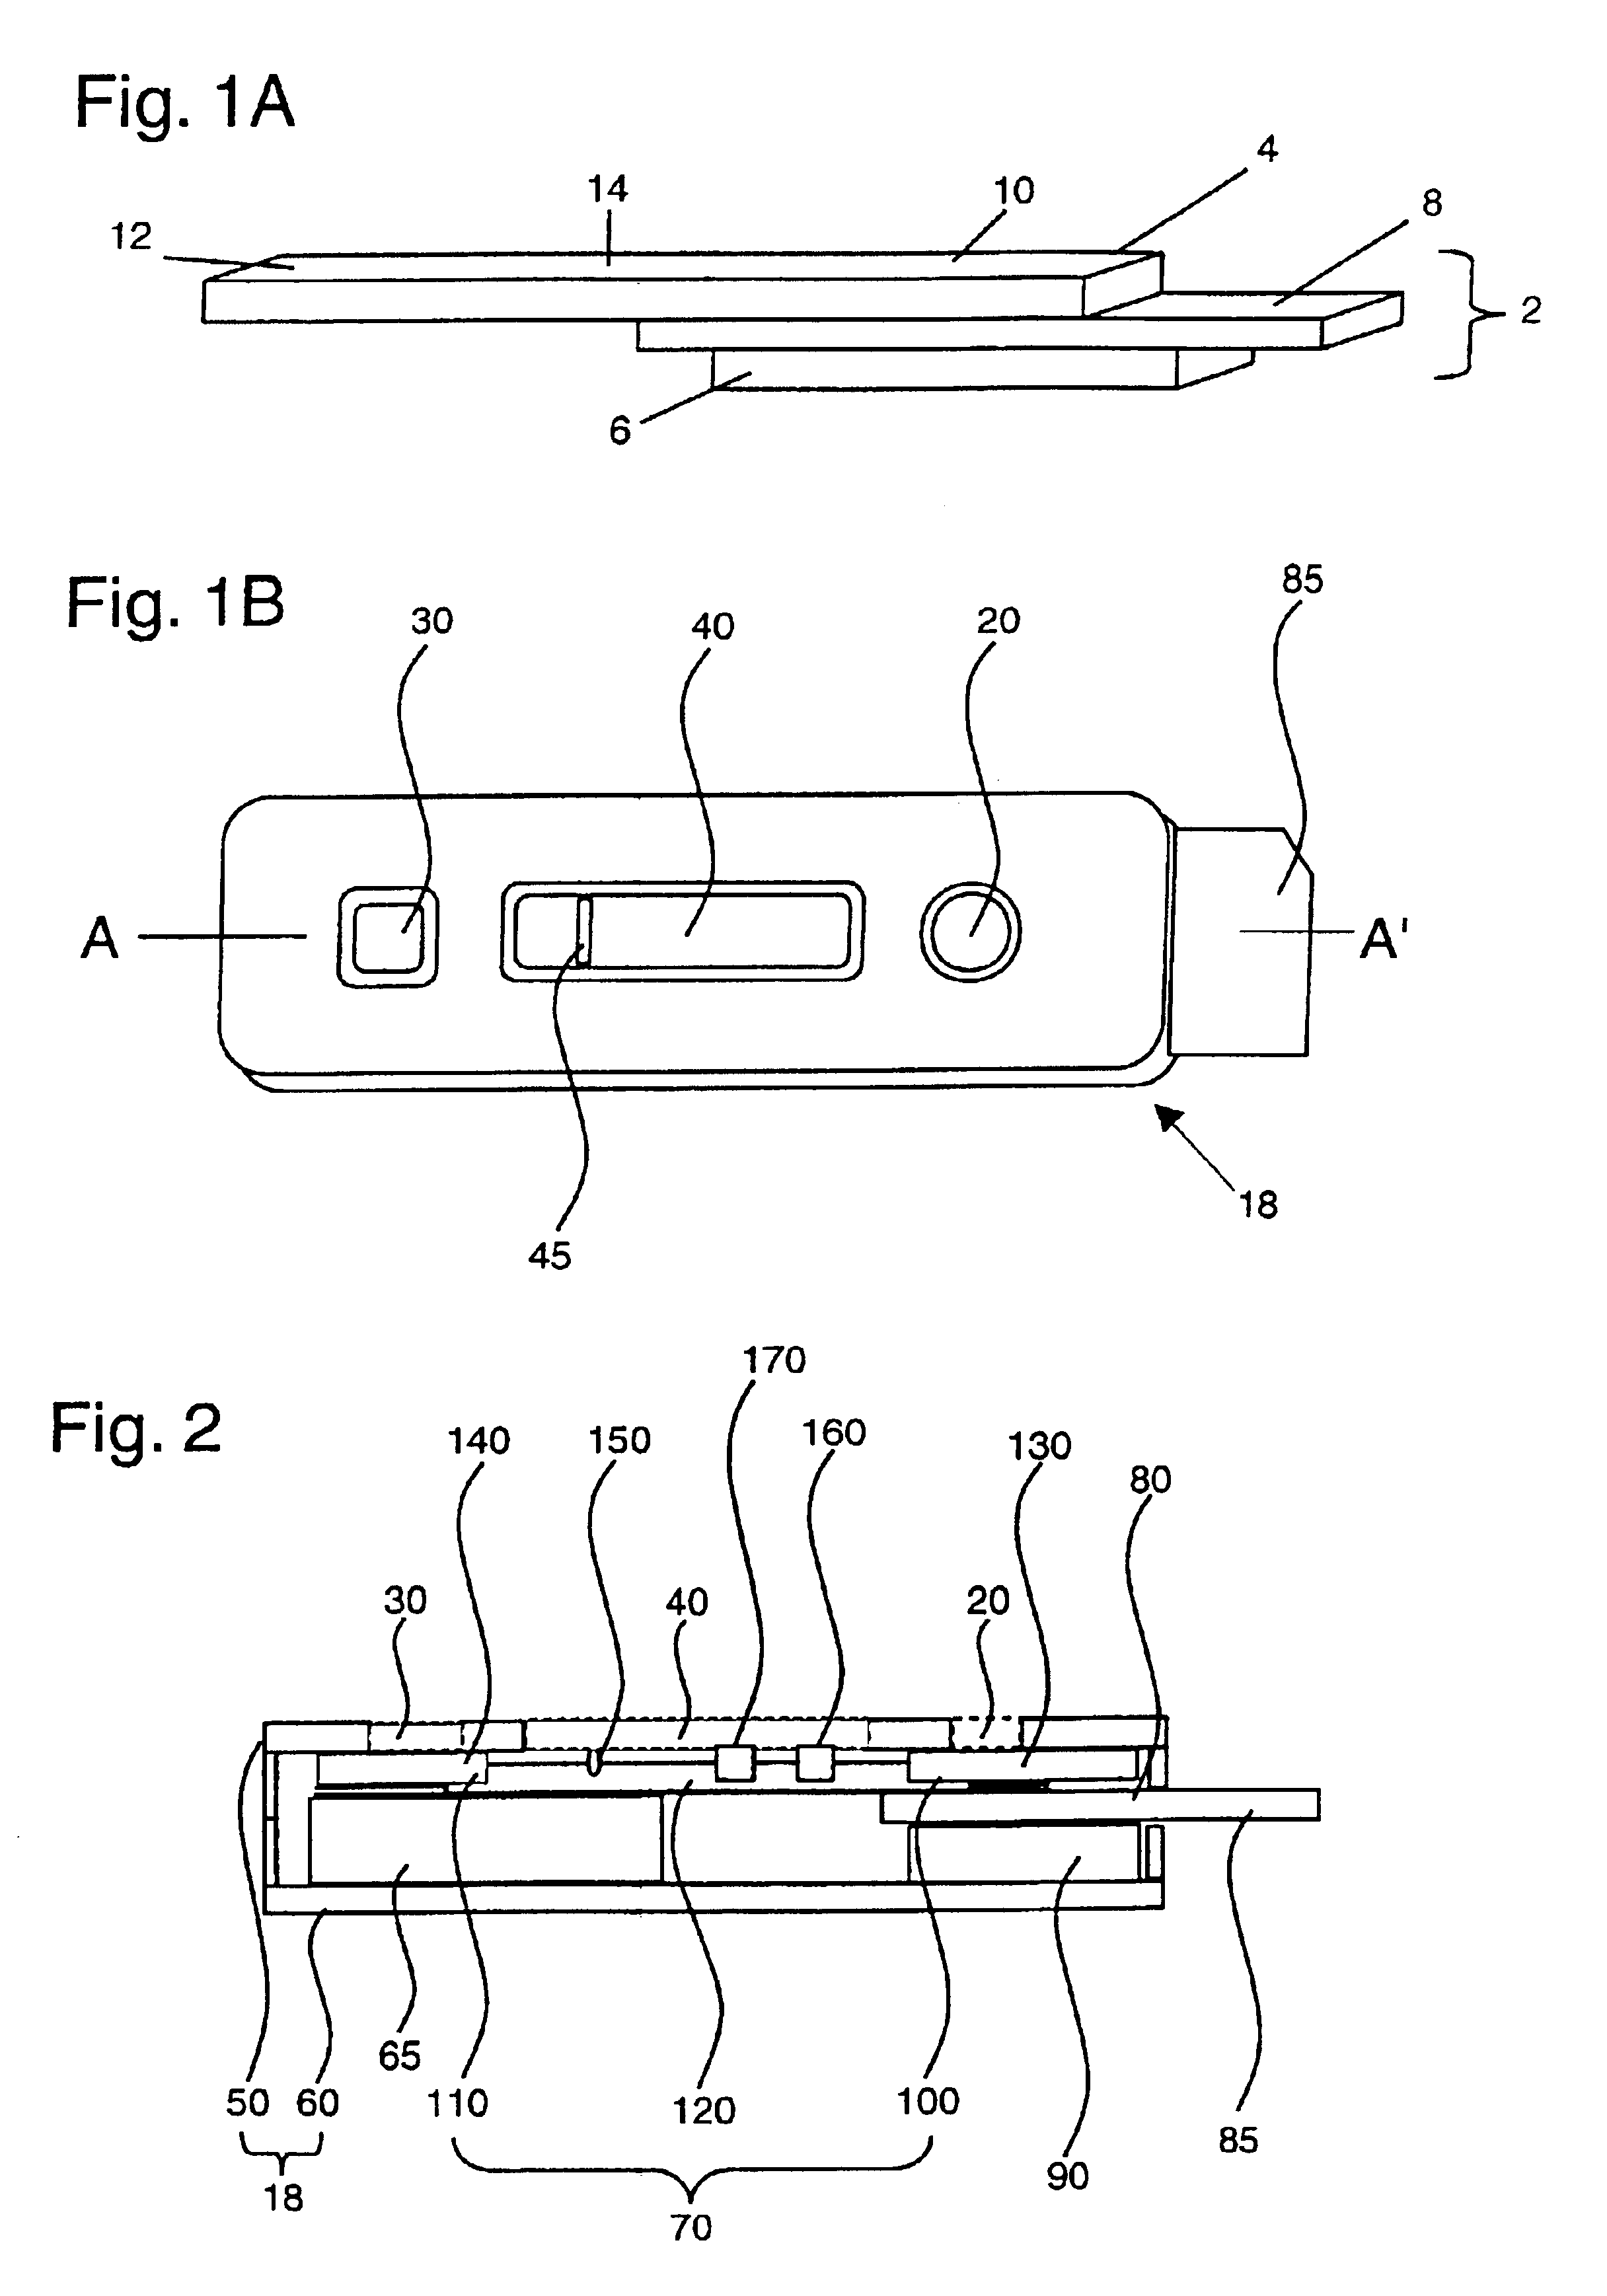 Assay devices and methods of analyte detection